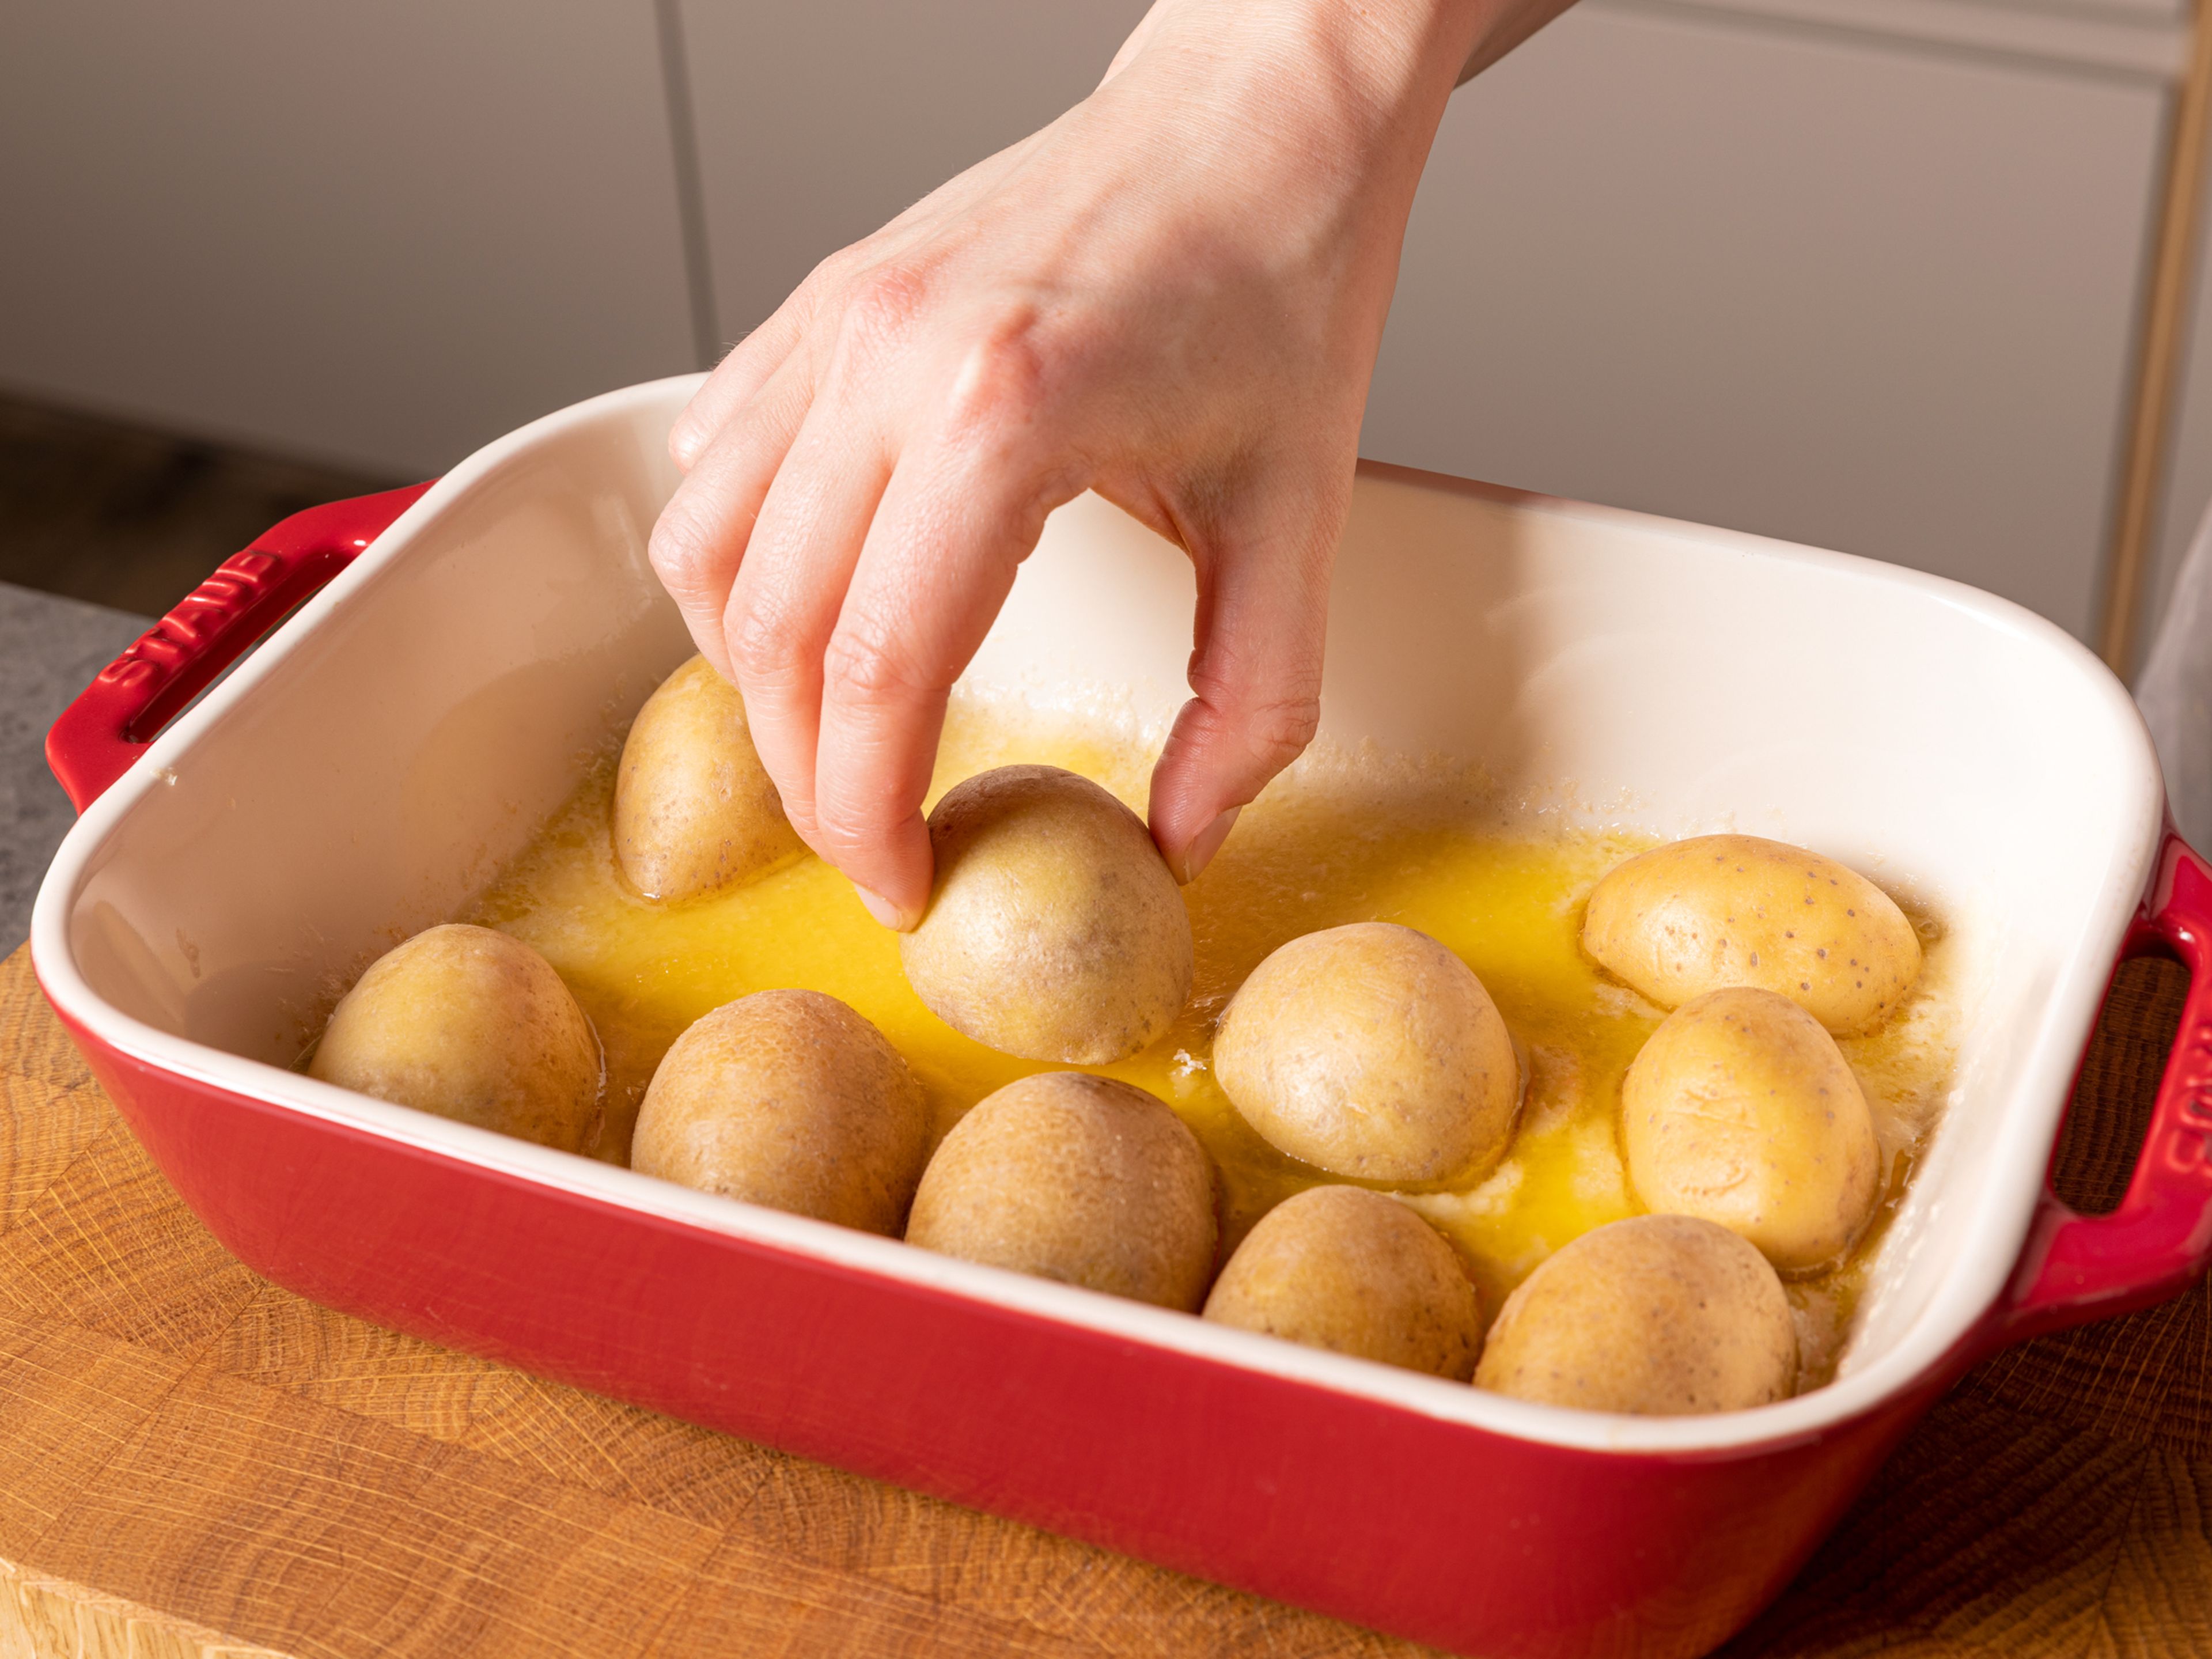 Put butter in the hot baking dish and let it melt. Then add ¾ of the Parmesan on the bottom of the dish evenly. Place potatoes on top cut side down. Season with salt and pepper and bake for approx. 20 min.